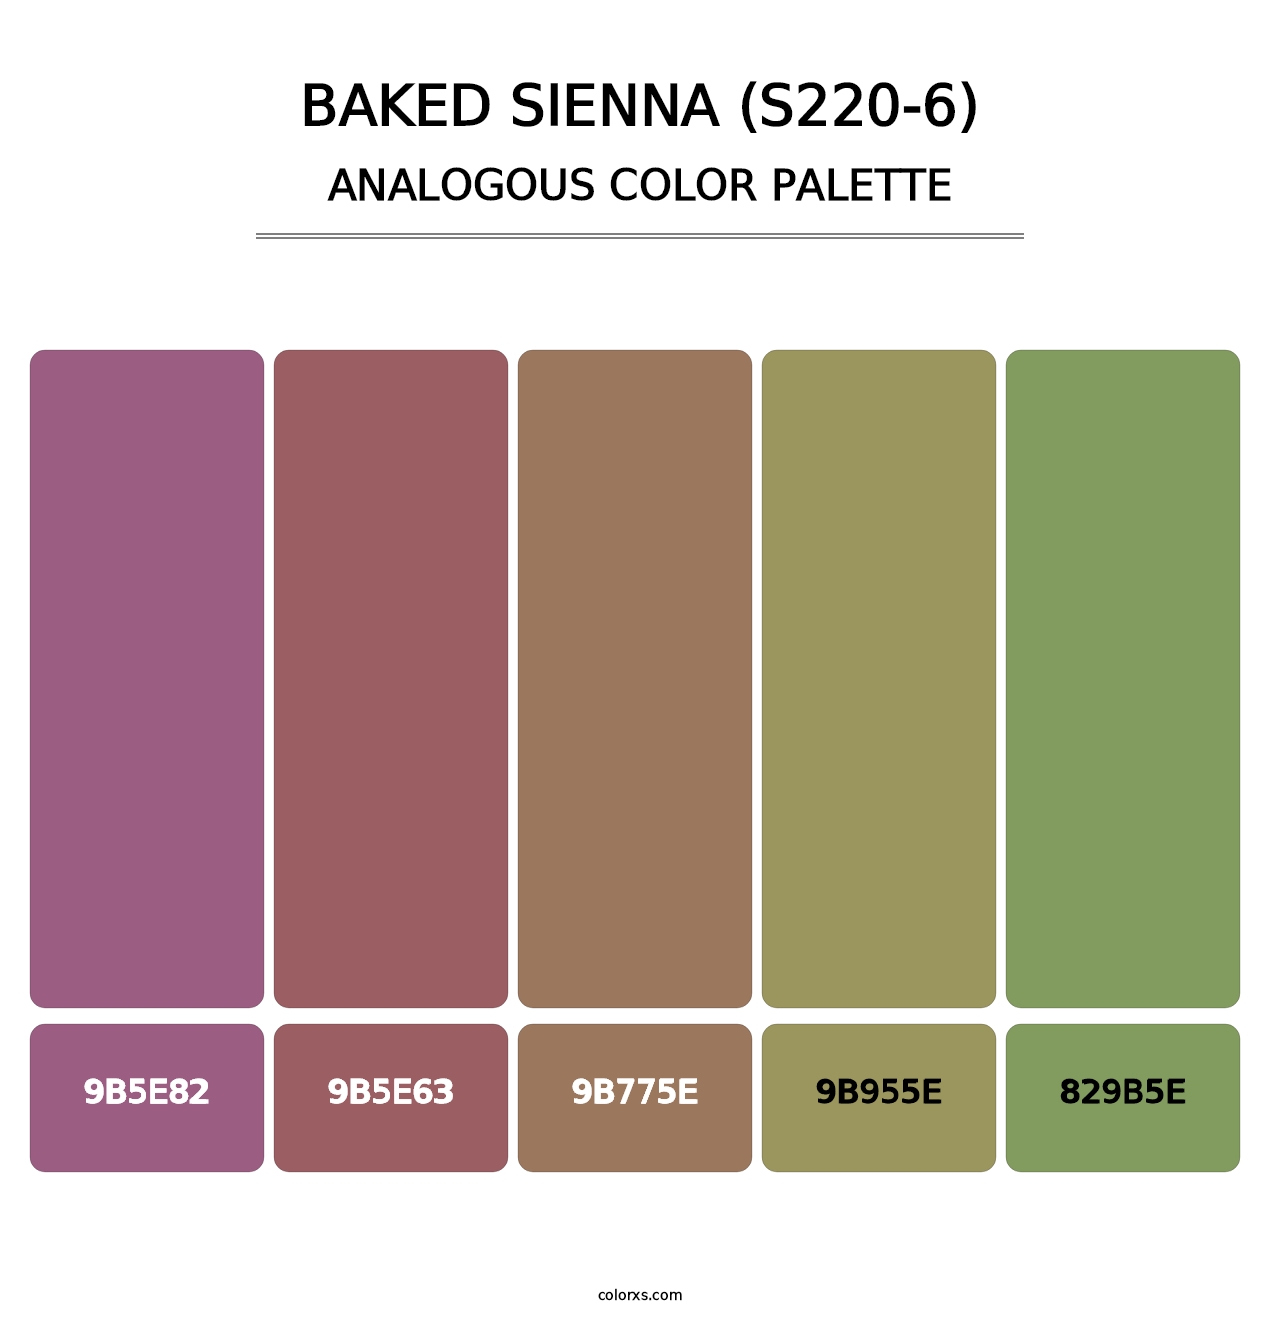 Baked Sienna (S220-6) - Analogous Color Palette